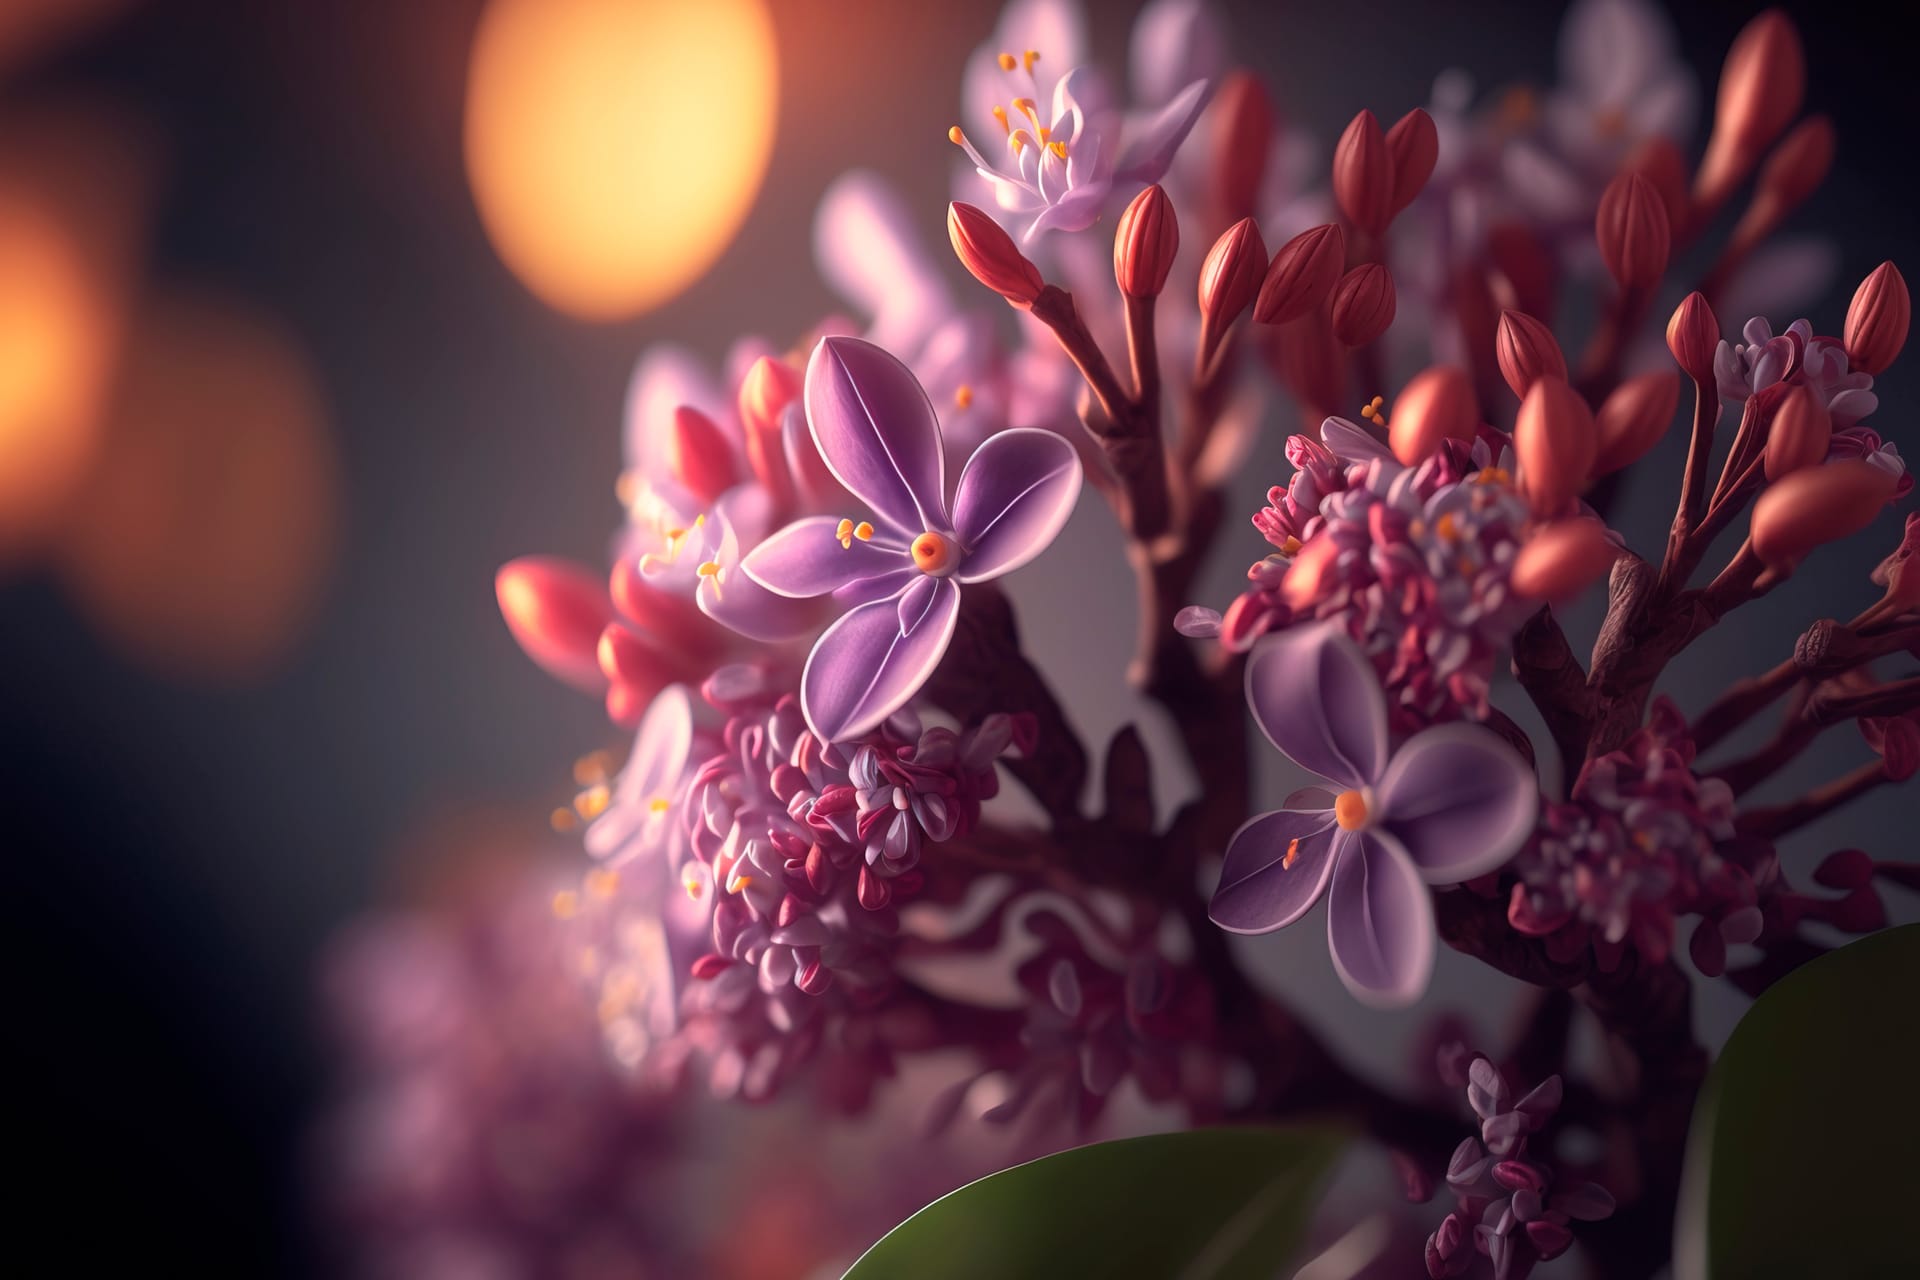 Spring lilac violet flowers abstract soft floral background excellent image